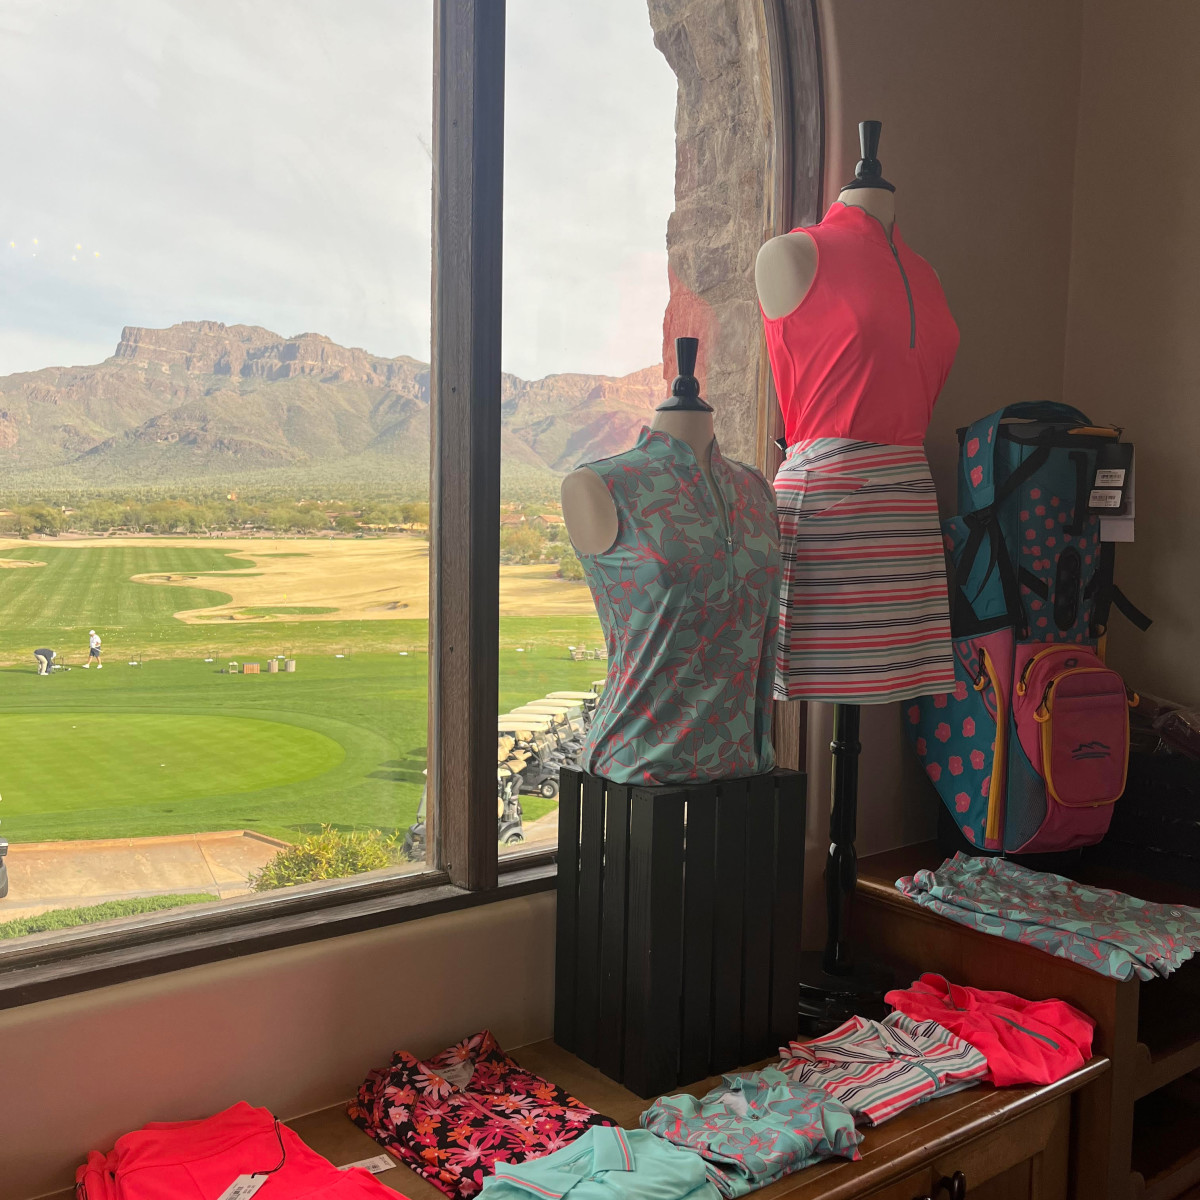 The pro shop at Superstition Mountain has abundant women’s golf apparel options, and they’re displayed front and center.